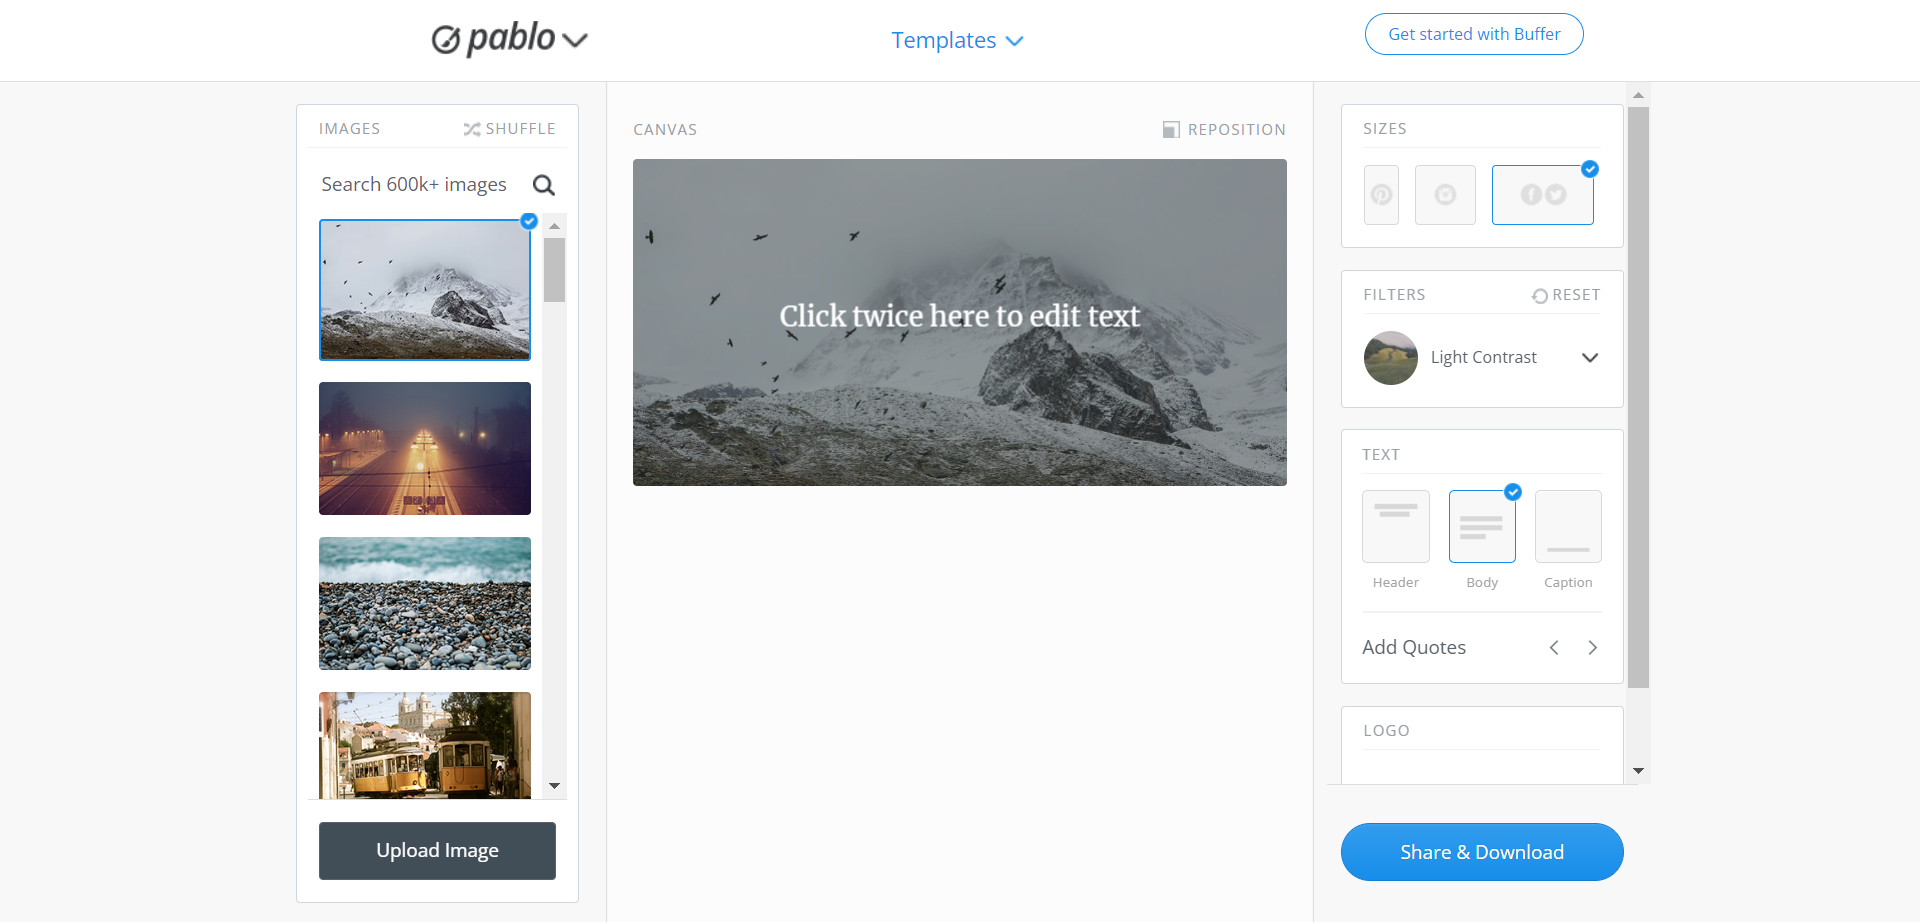 Pablo by Buffer Design engaging images for your social media posts in under 30 seconds